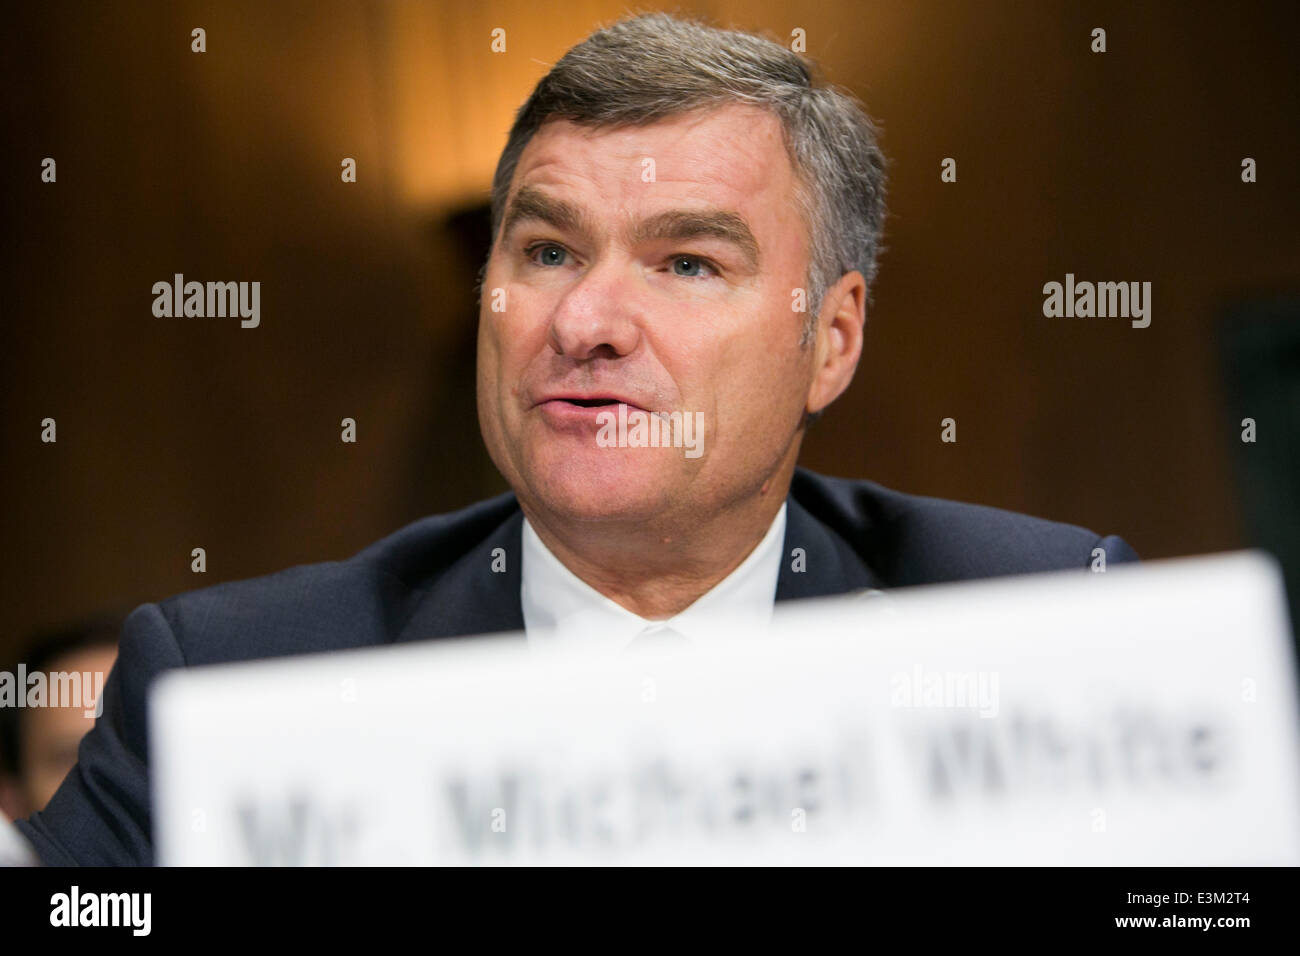 Washington DC, USA. 24th June, 2014. Michael White, chairman and CEO of DIRECTV, testifies before the Senate Antitrust, Competition Policy and Consumer Rights Subcommittee during a hearing on 'The AT&T/DIRECTV Merger: The Impact on Competition and Consumers in the Video Market and Beyond,' in Washington, D.C. on June 24, 2014. Credit:  Kristoffer Tripplaar/Alamy Live News Stock Photo